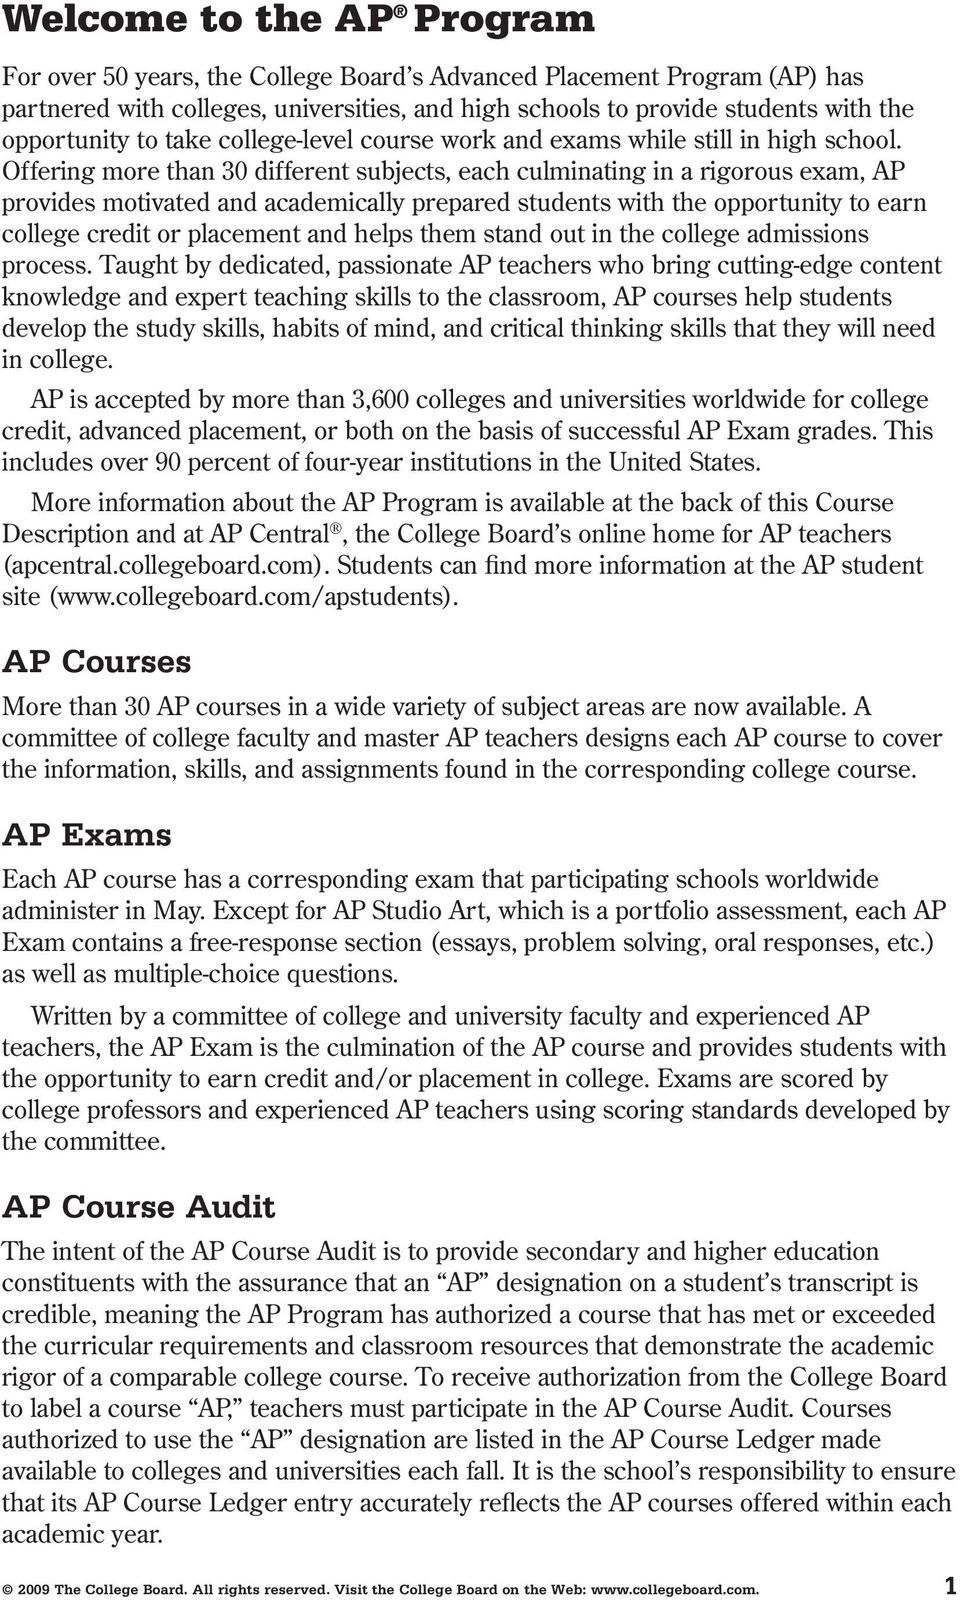 Offering more than 30 different subjects, each culminating in a rigorous exam, AP provides motivated and academically prepared students with the opportunity to earn college credit or placement and